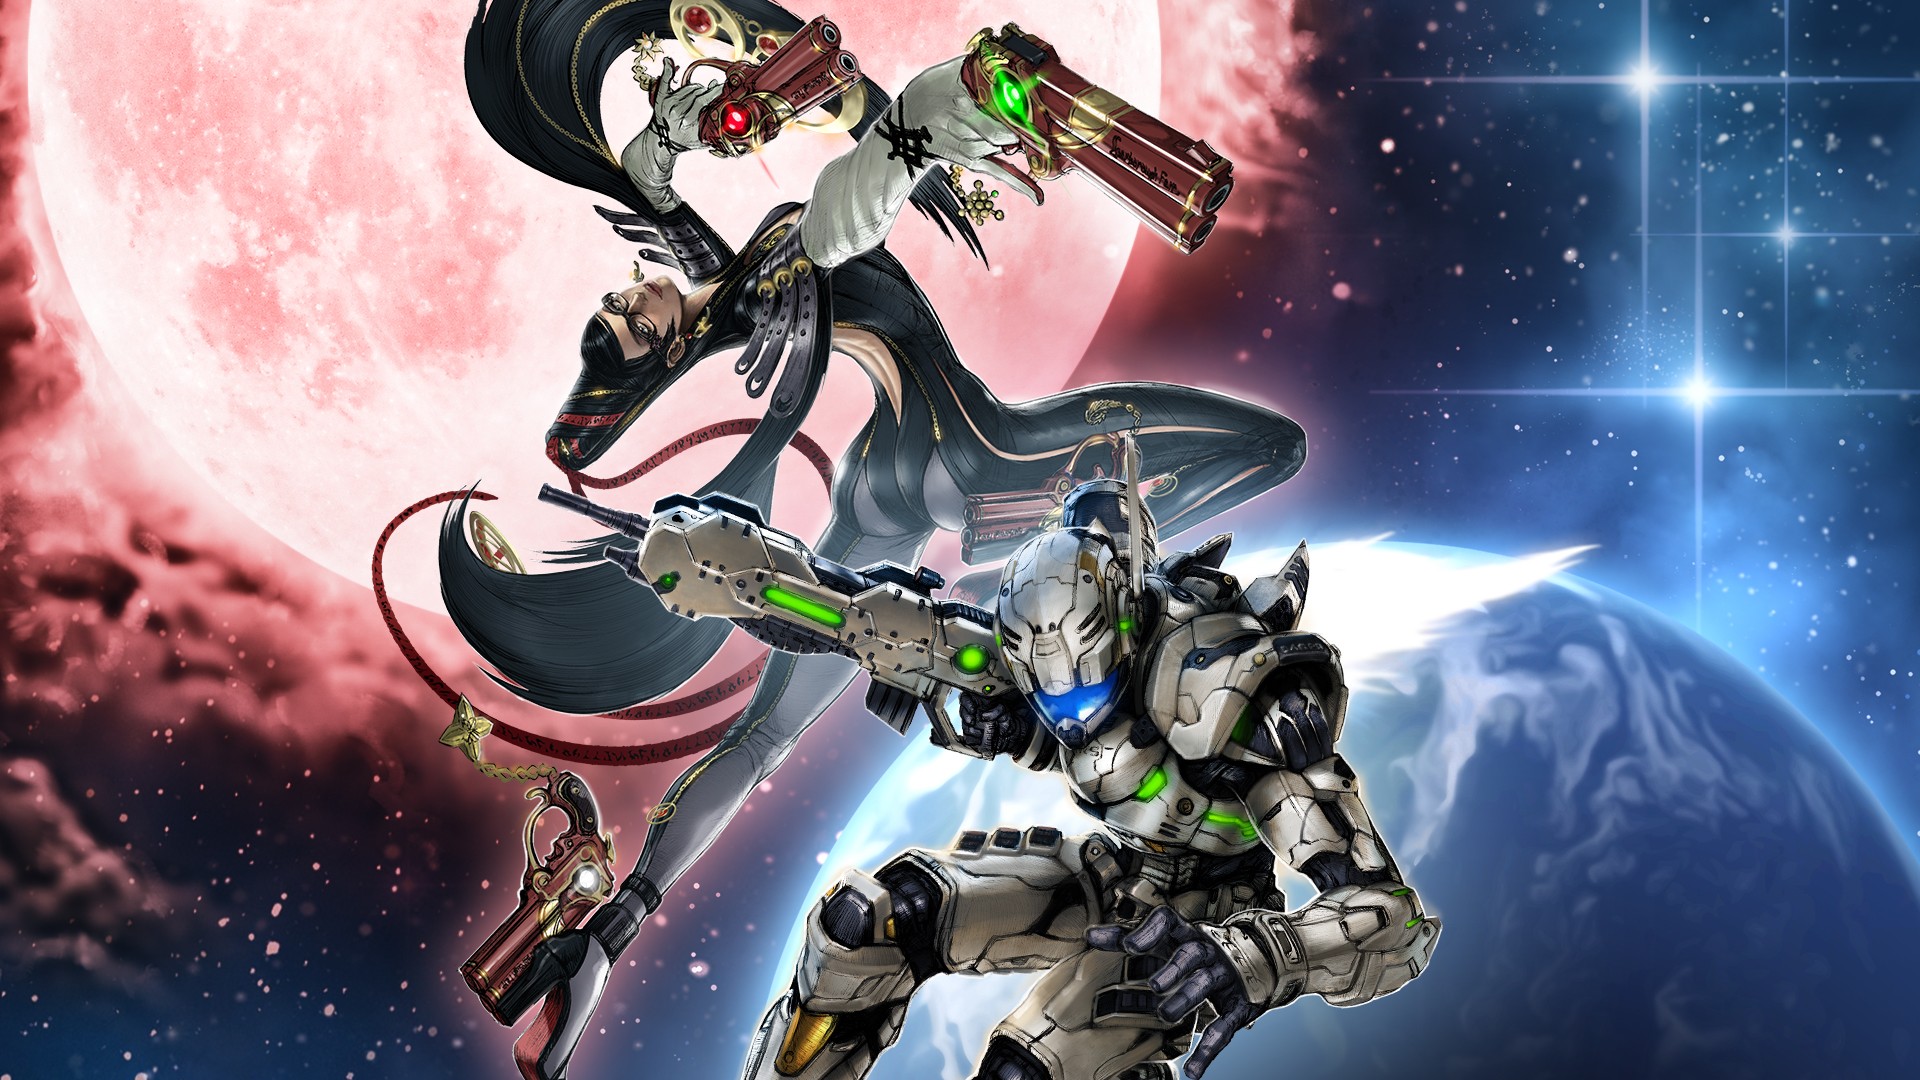 Video For Bayonetta and Vanquish Get Bundled Up for Xbox on February 18, 2020